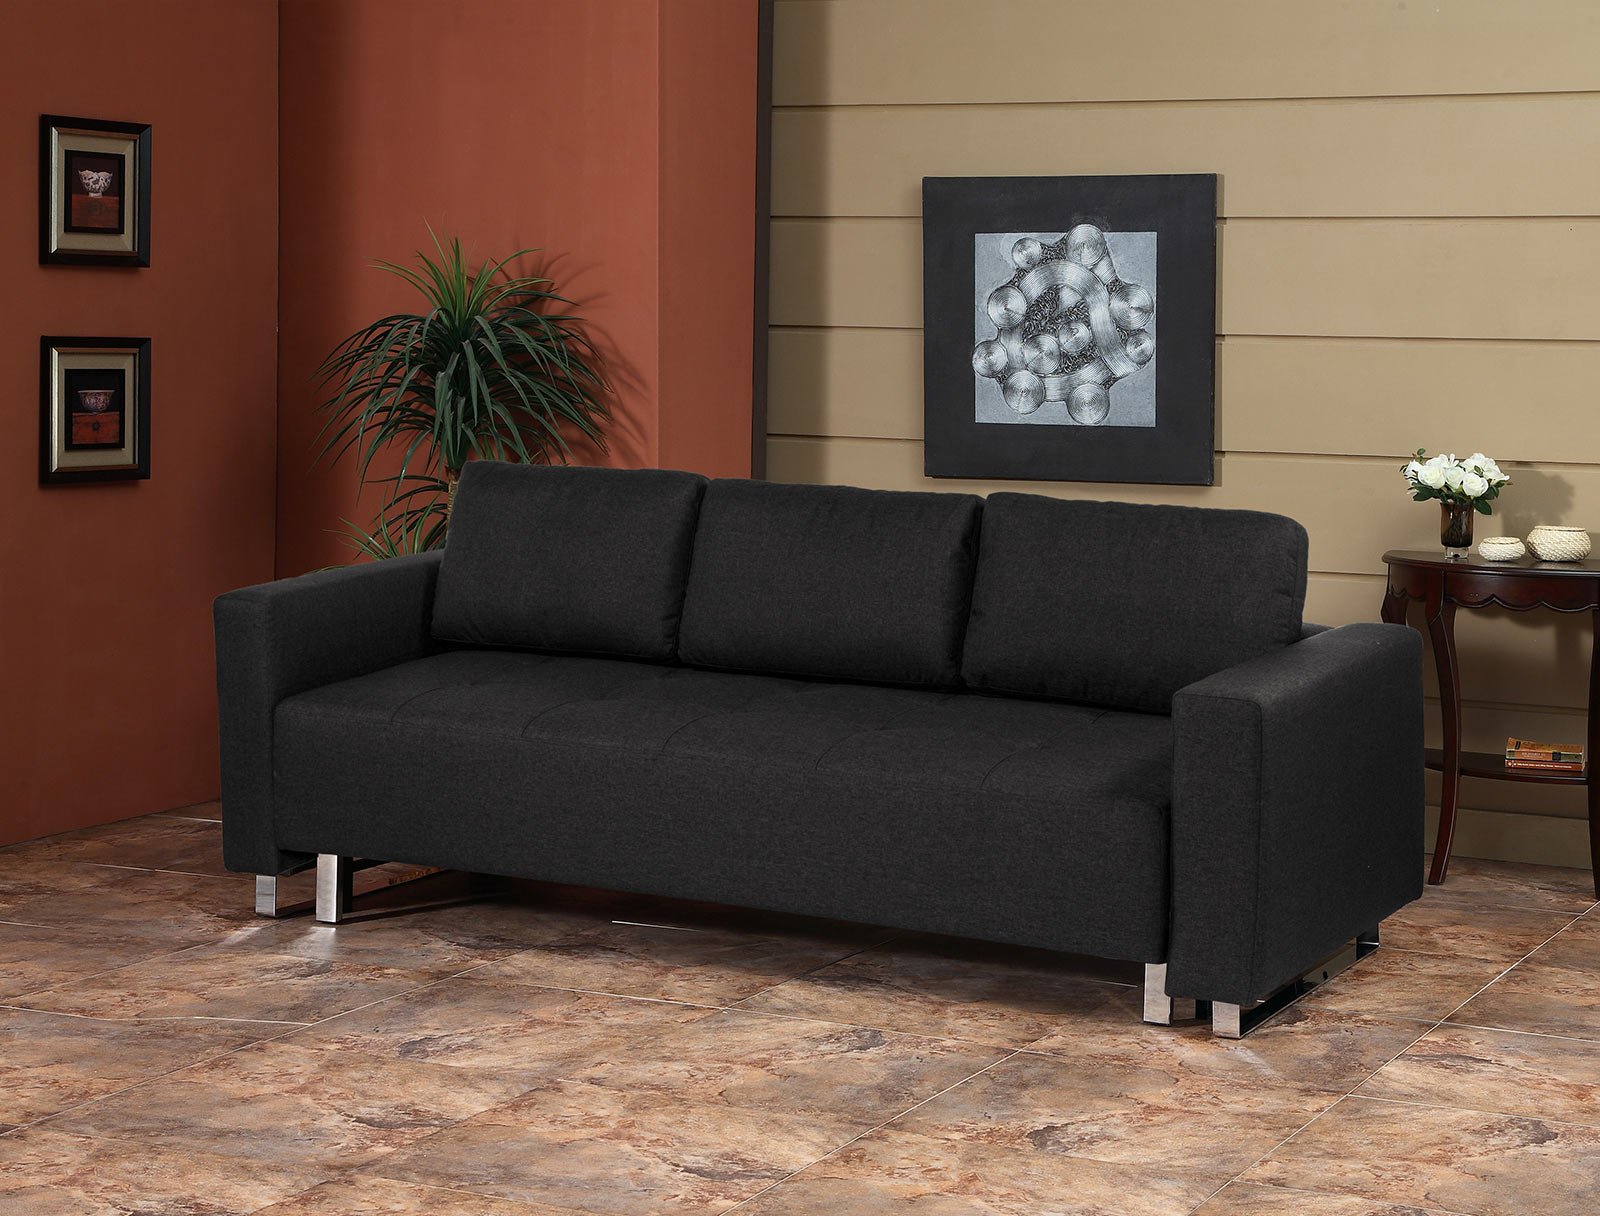 Lincoln Park Convertible Sofa Bed Charcoal by Serta Lifestyle